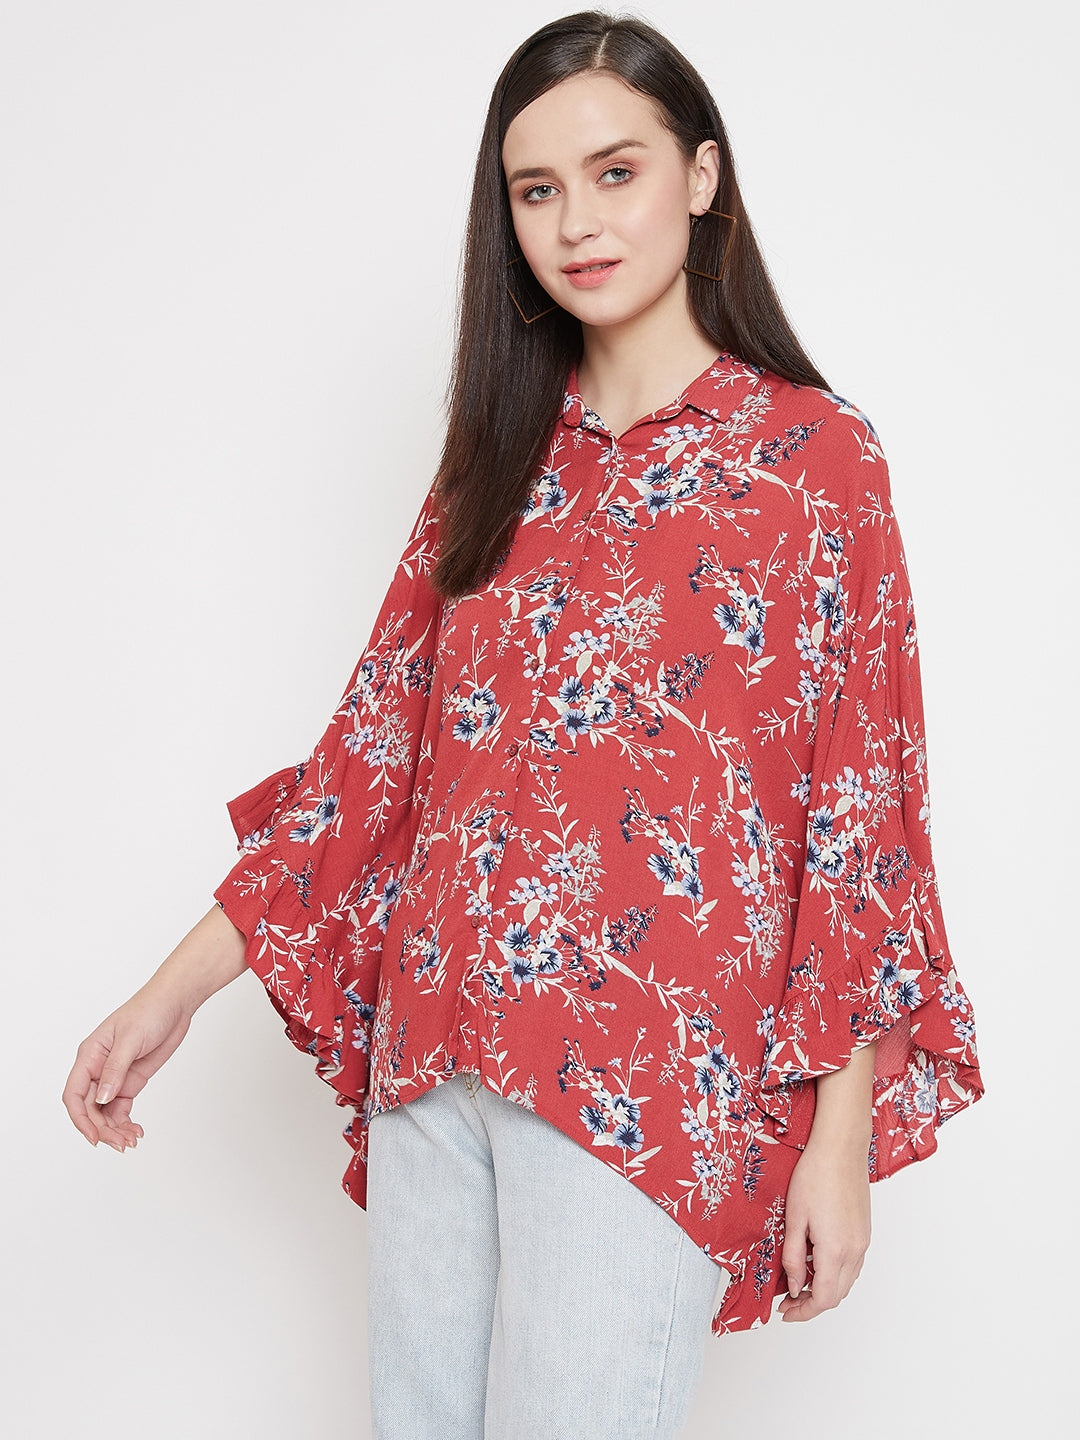 Red Poncho Party Top - Women Tops